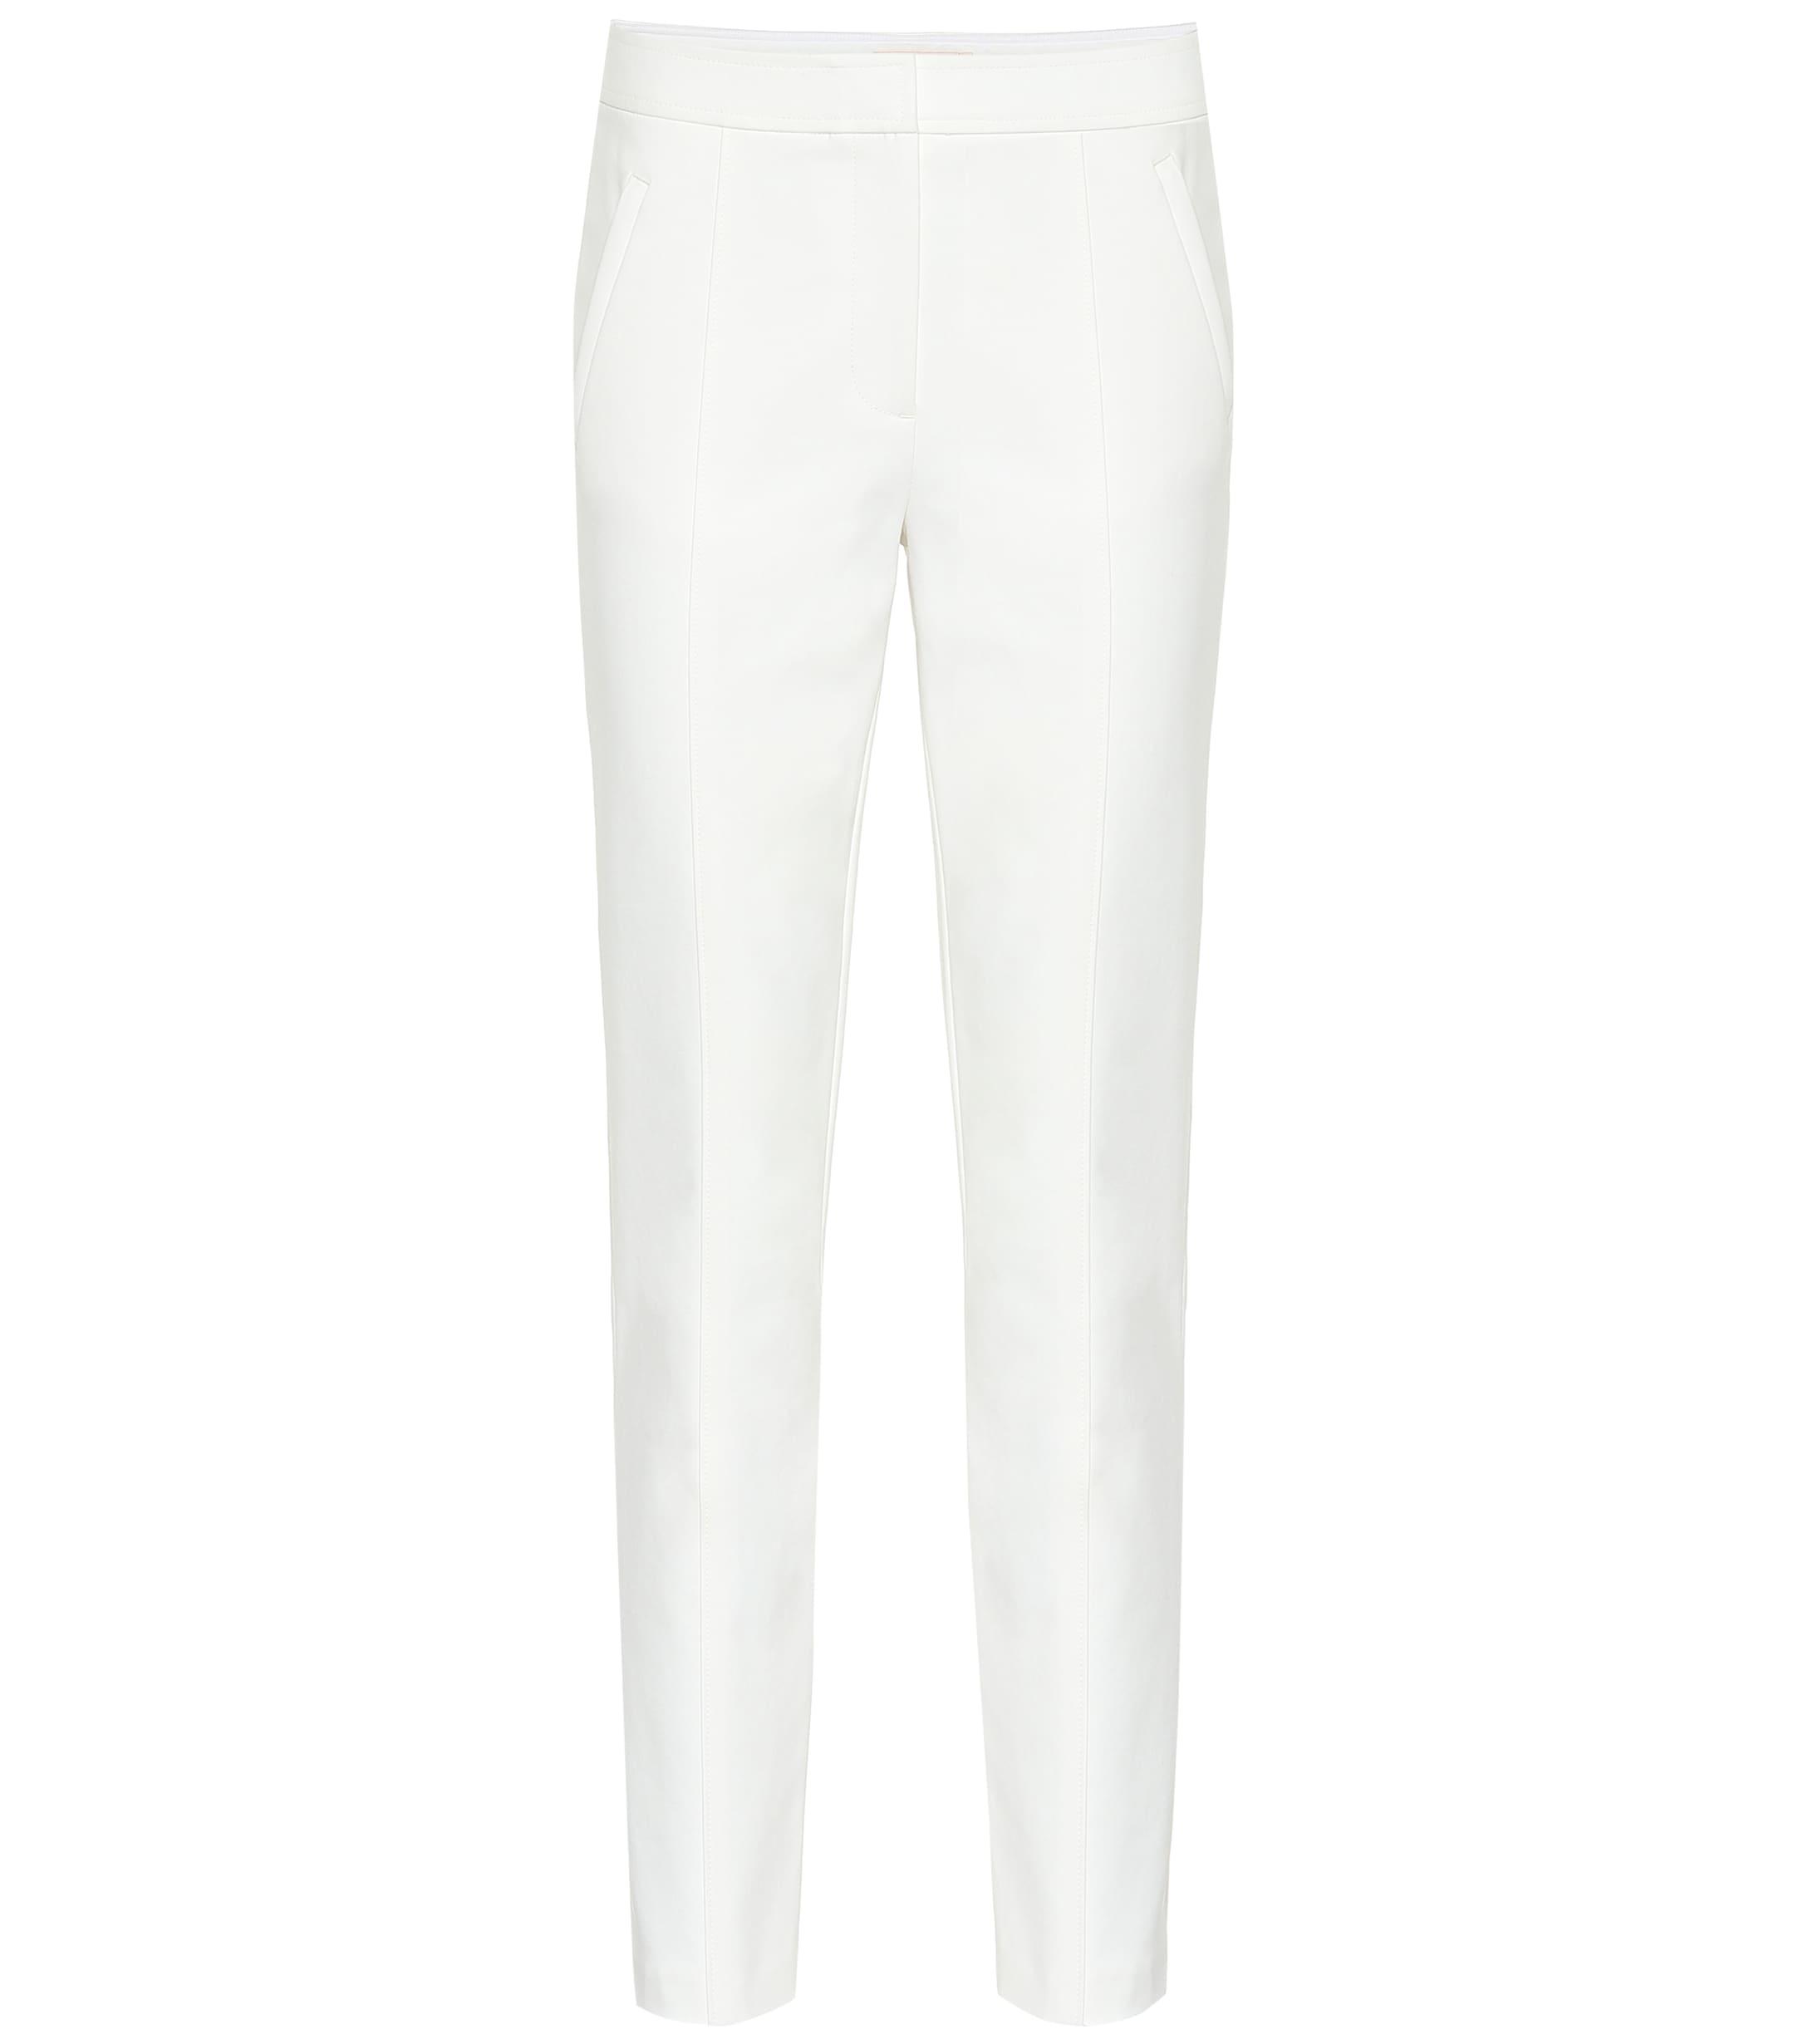 Tory Burch Vanner Mid-rise Straight Pants in White - Lyst